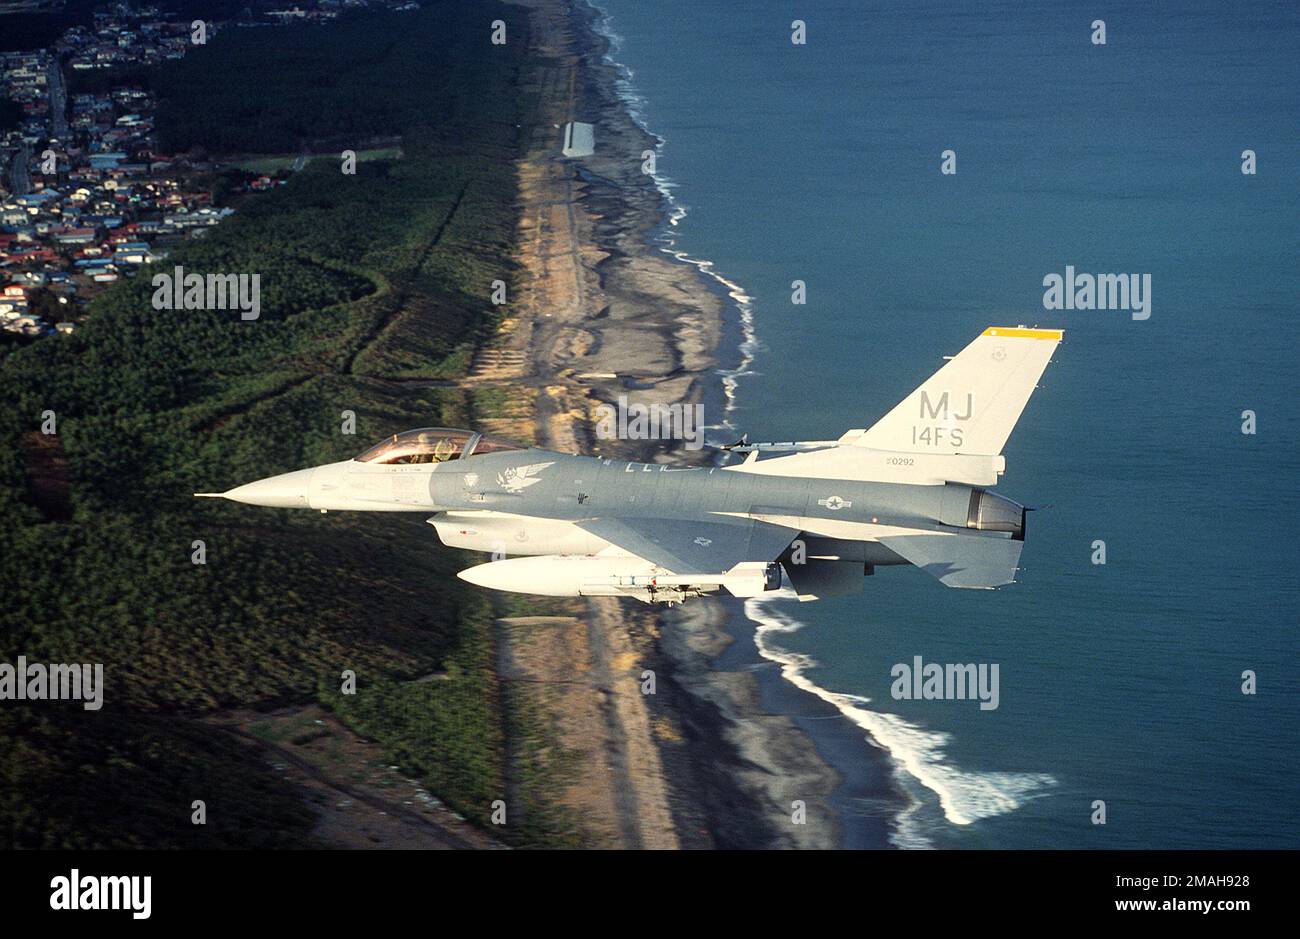 An F-16C Fighting Falcon aircraft of the 14th Fighter Squadron flies over the coastline near Misawa Air Base. The aircraft is armed with AIM-9 Sidewinder missiles.. Country: Japan(JPN) Stock Photo